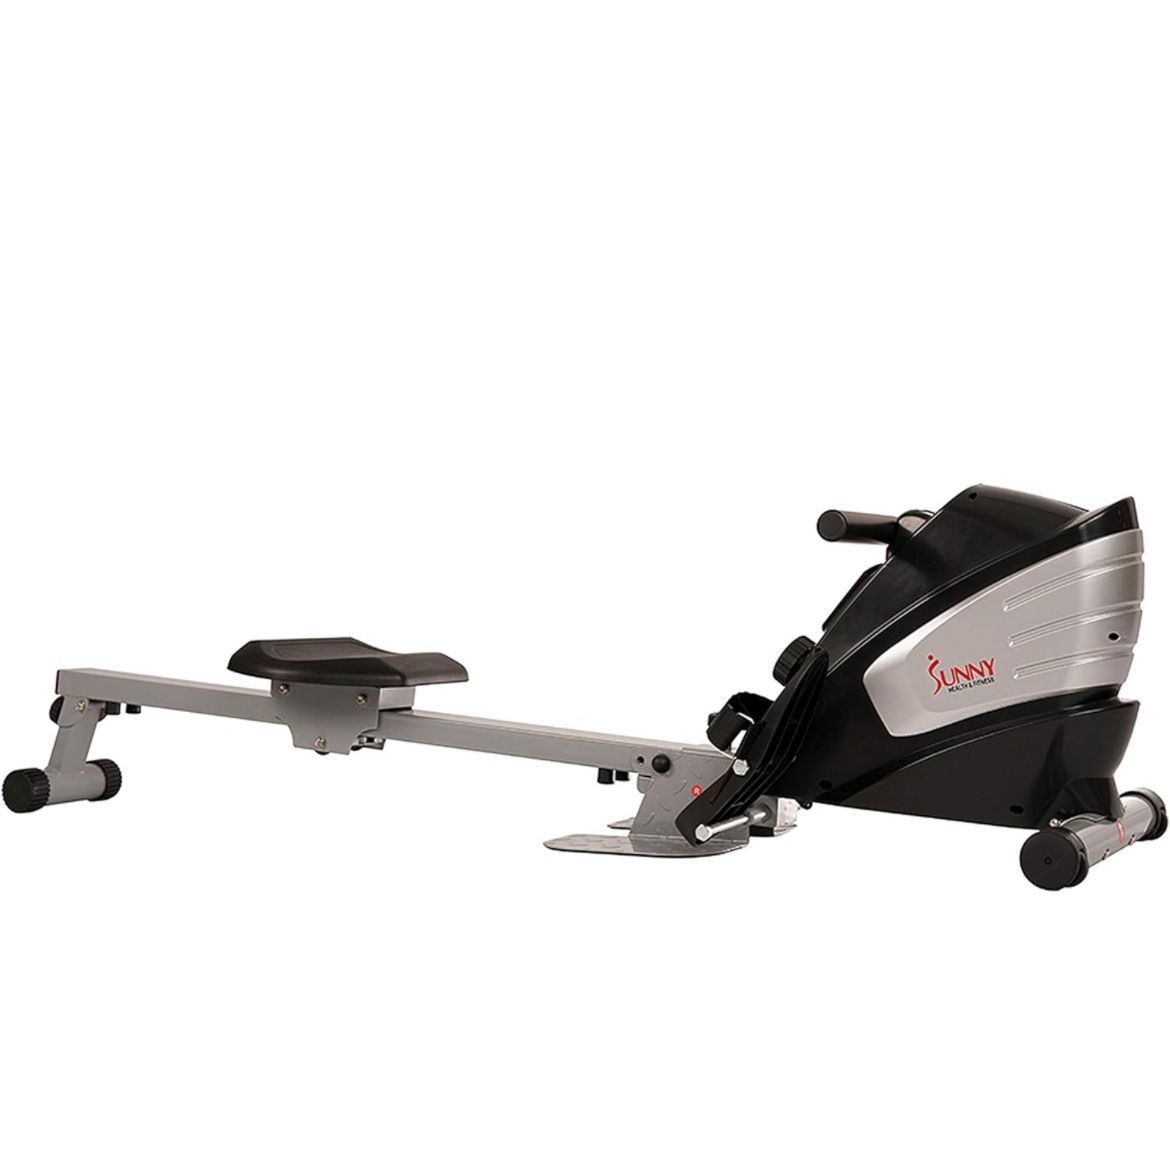 Sunny Fit Magnetic rower For immediate sale